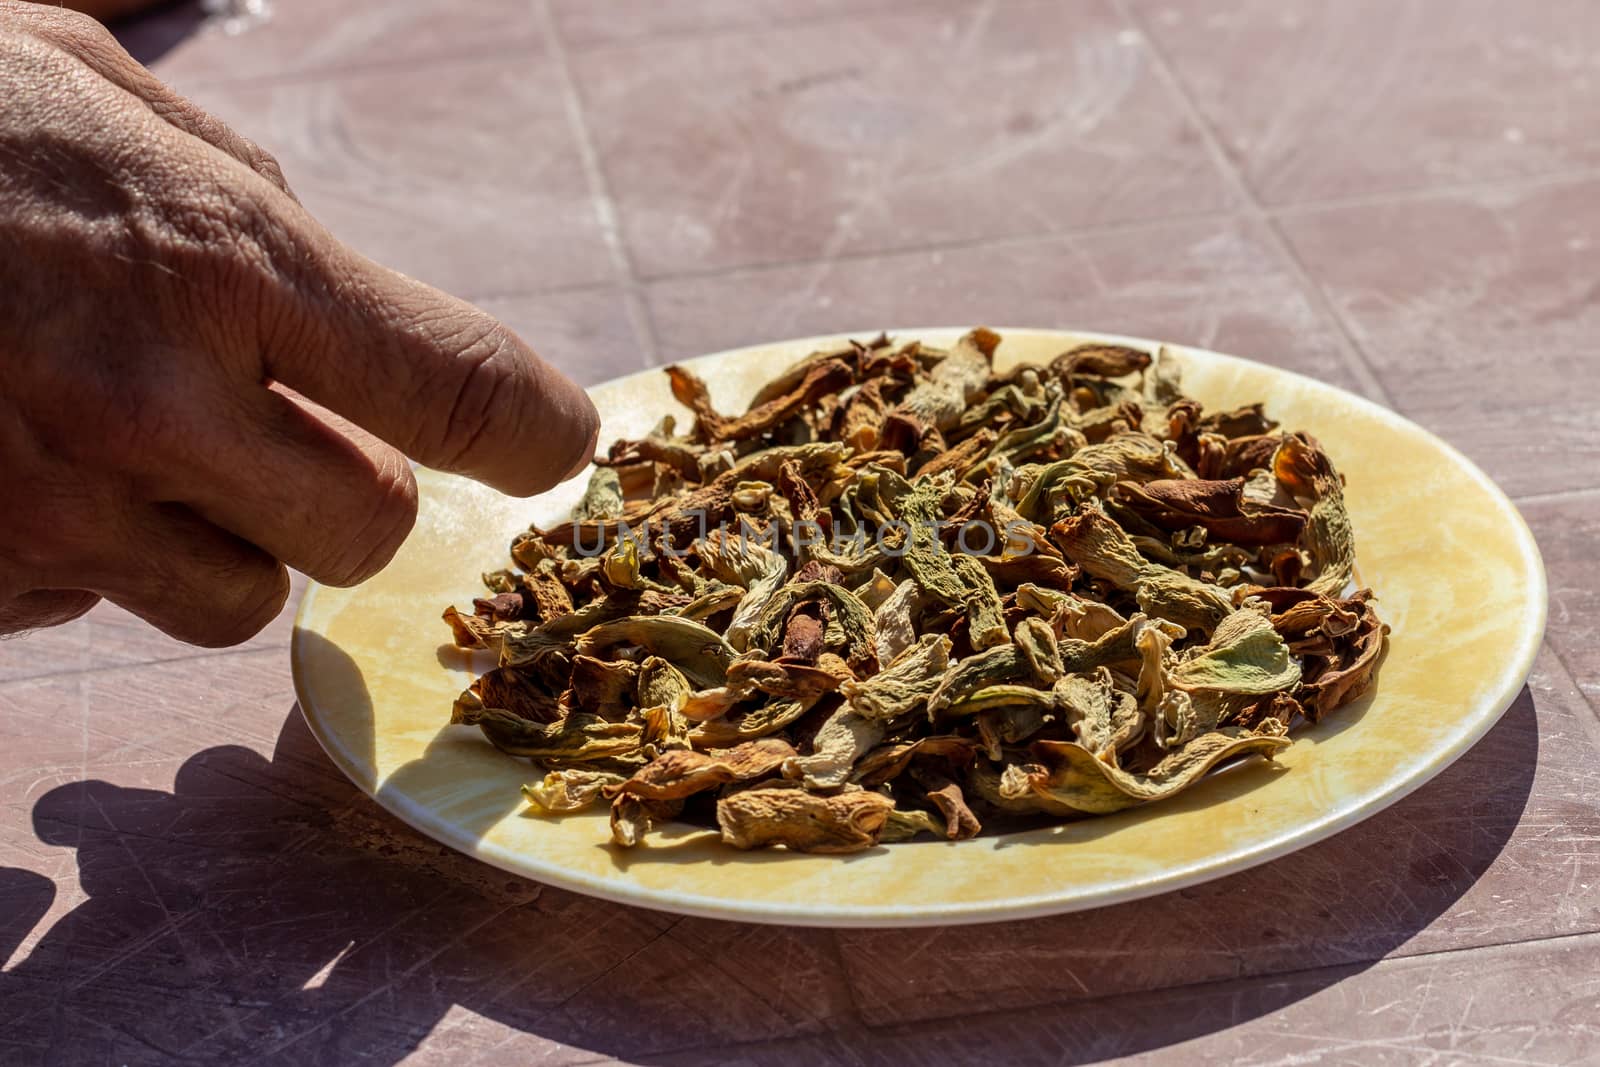 a side view shoot to dried peppers on plate with a person touching it. photo has taken at a village at turkey.